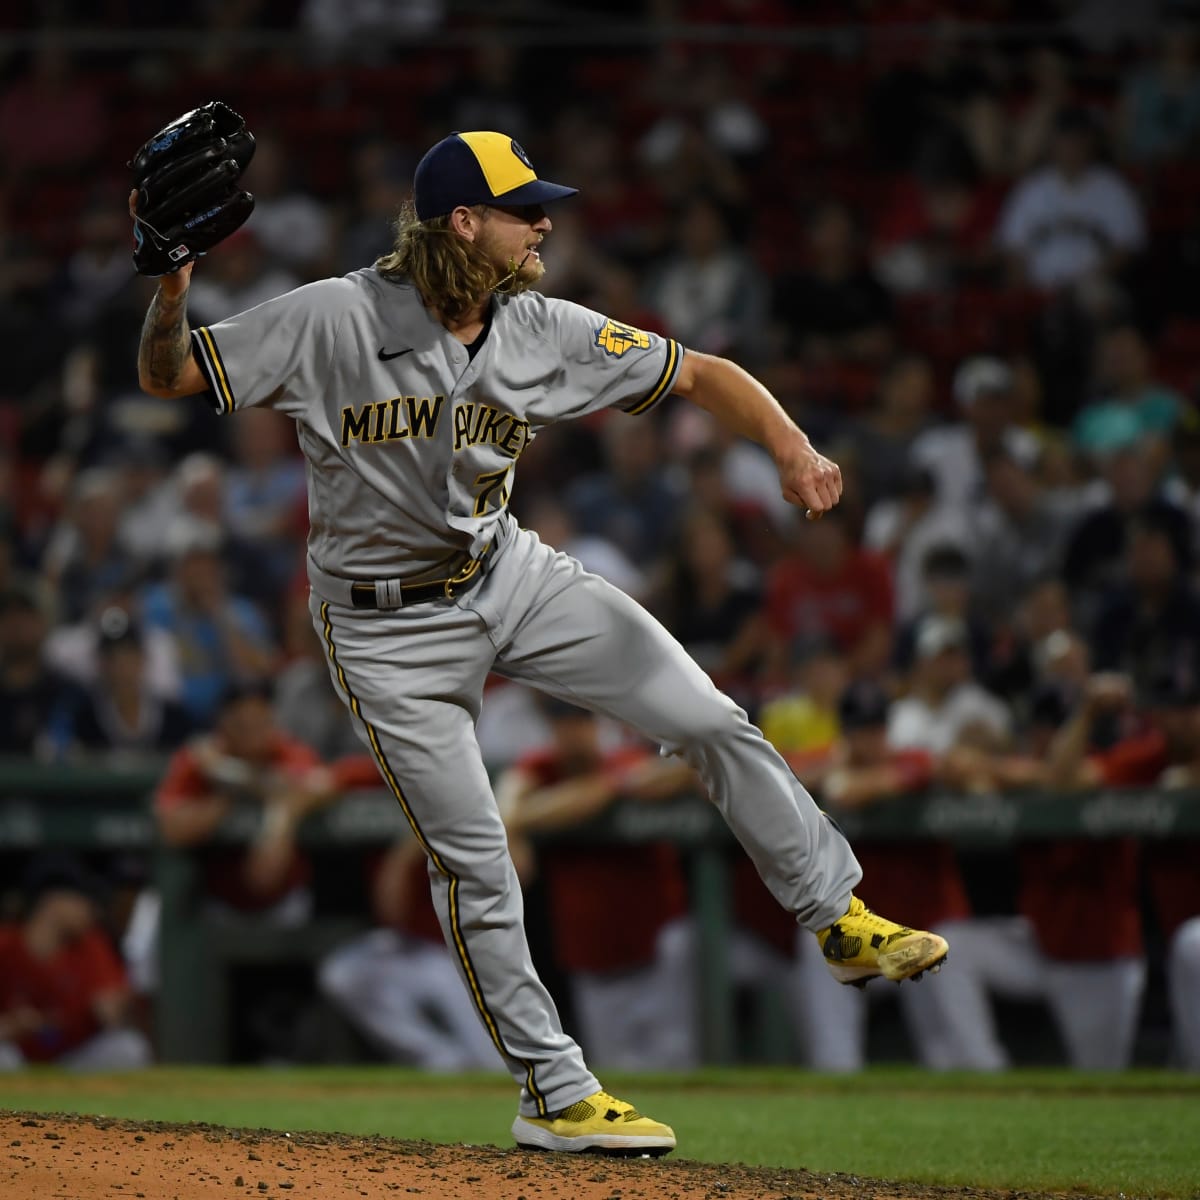 Padres closer Josh Hader recovers from trade-deadline stumbles